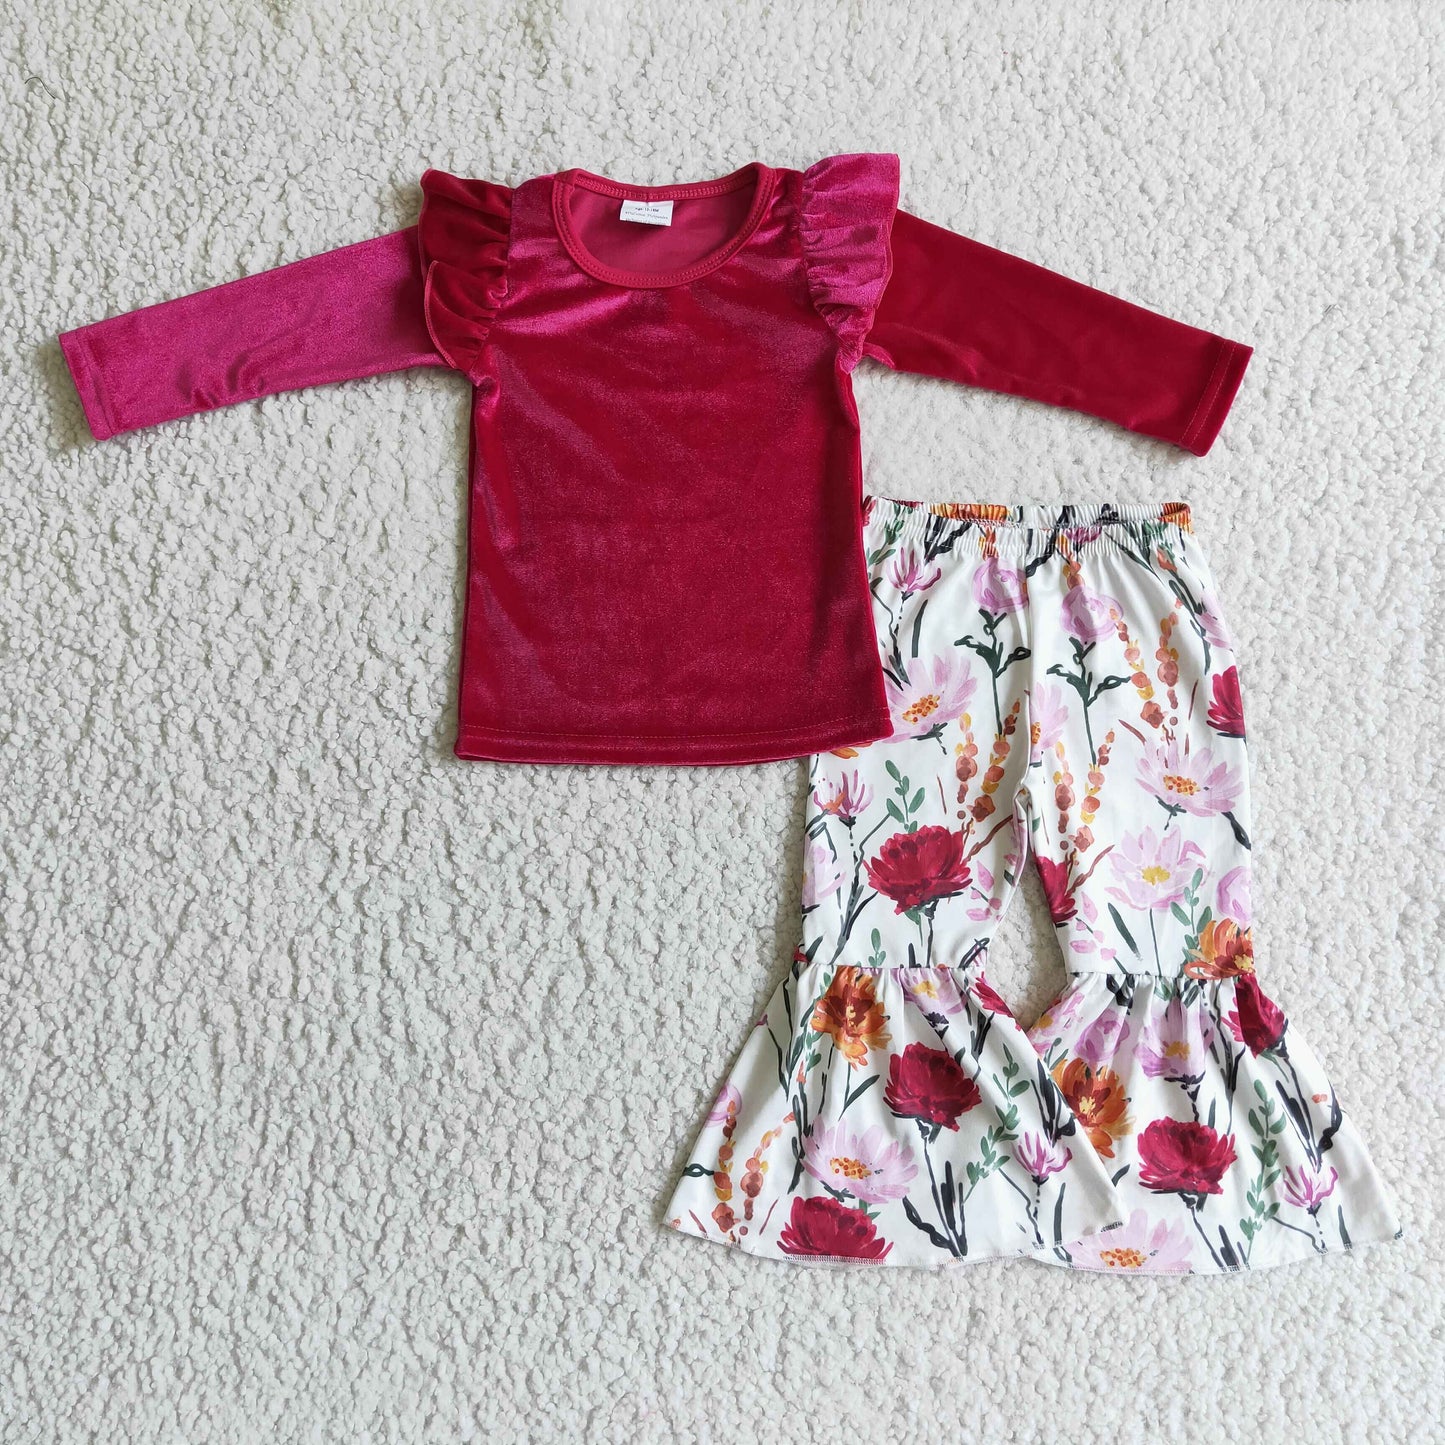 Red velvet shirt floral bell bottom pants baby kids fall clothes